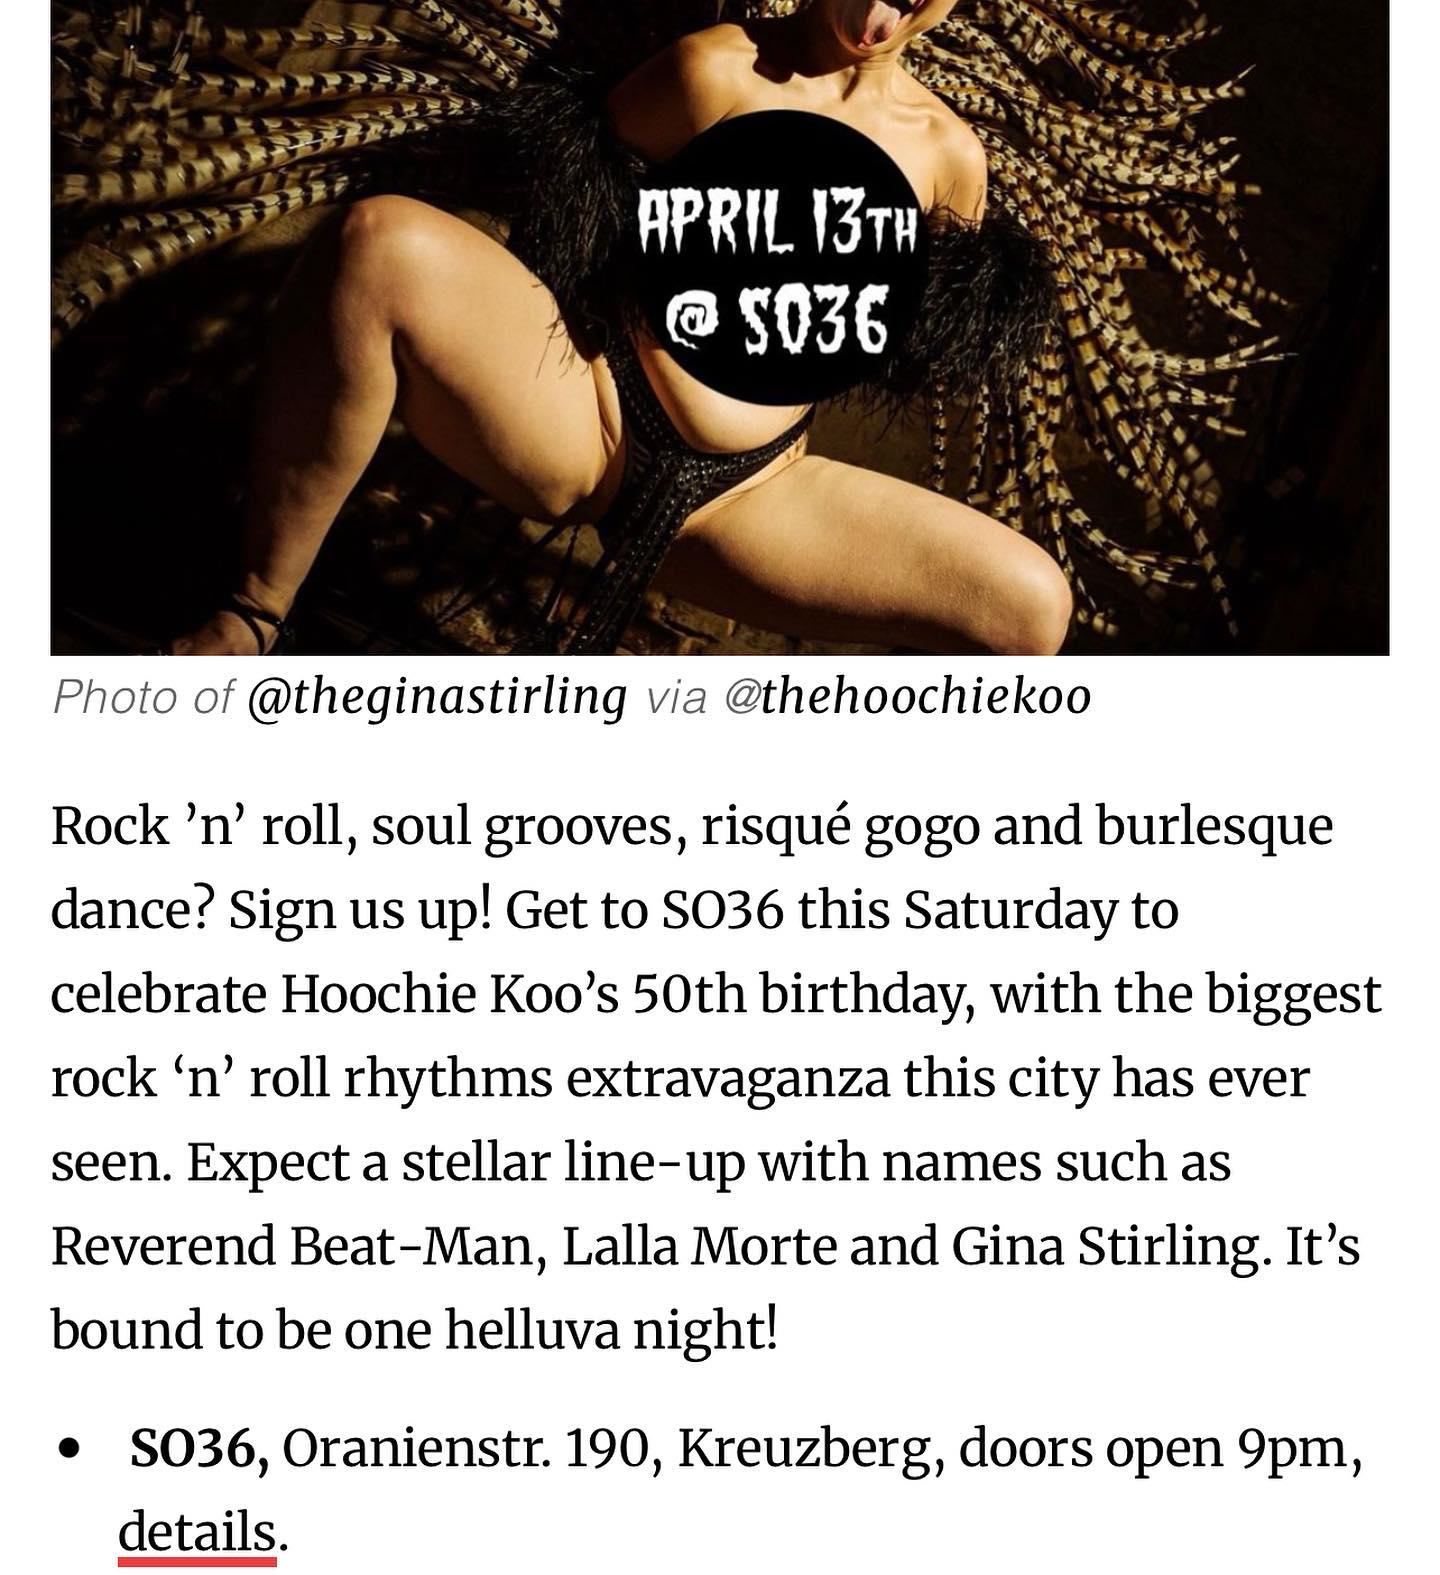 Feeling very excited to have my first mention in Berlin Media with @exberliner_mag for @thehoochiekoo. This Saturday at @so36_club. I can’t wait to perform at this iconic event. 

📸 @paikov 

#theginastirling #ginastirling #ginastirlingburlesque #burlylife #internationalshowgirl #pinupgirl #burlesqueshow #burlesquecostume #costume #berlin #thehoochiekoo #so36 #berlinburlesque #berlincabaret #theberliner #exberlinermag